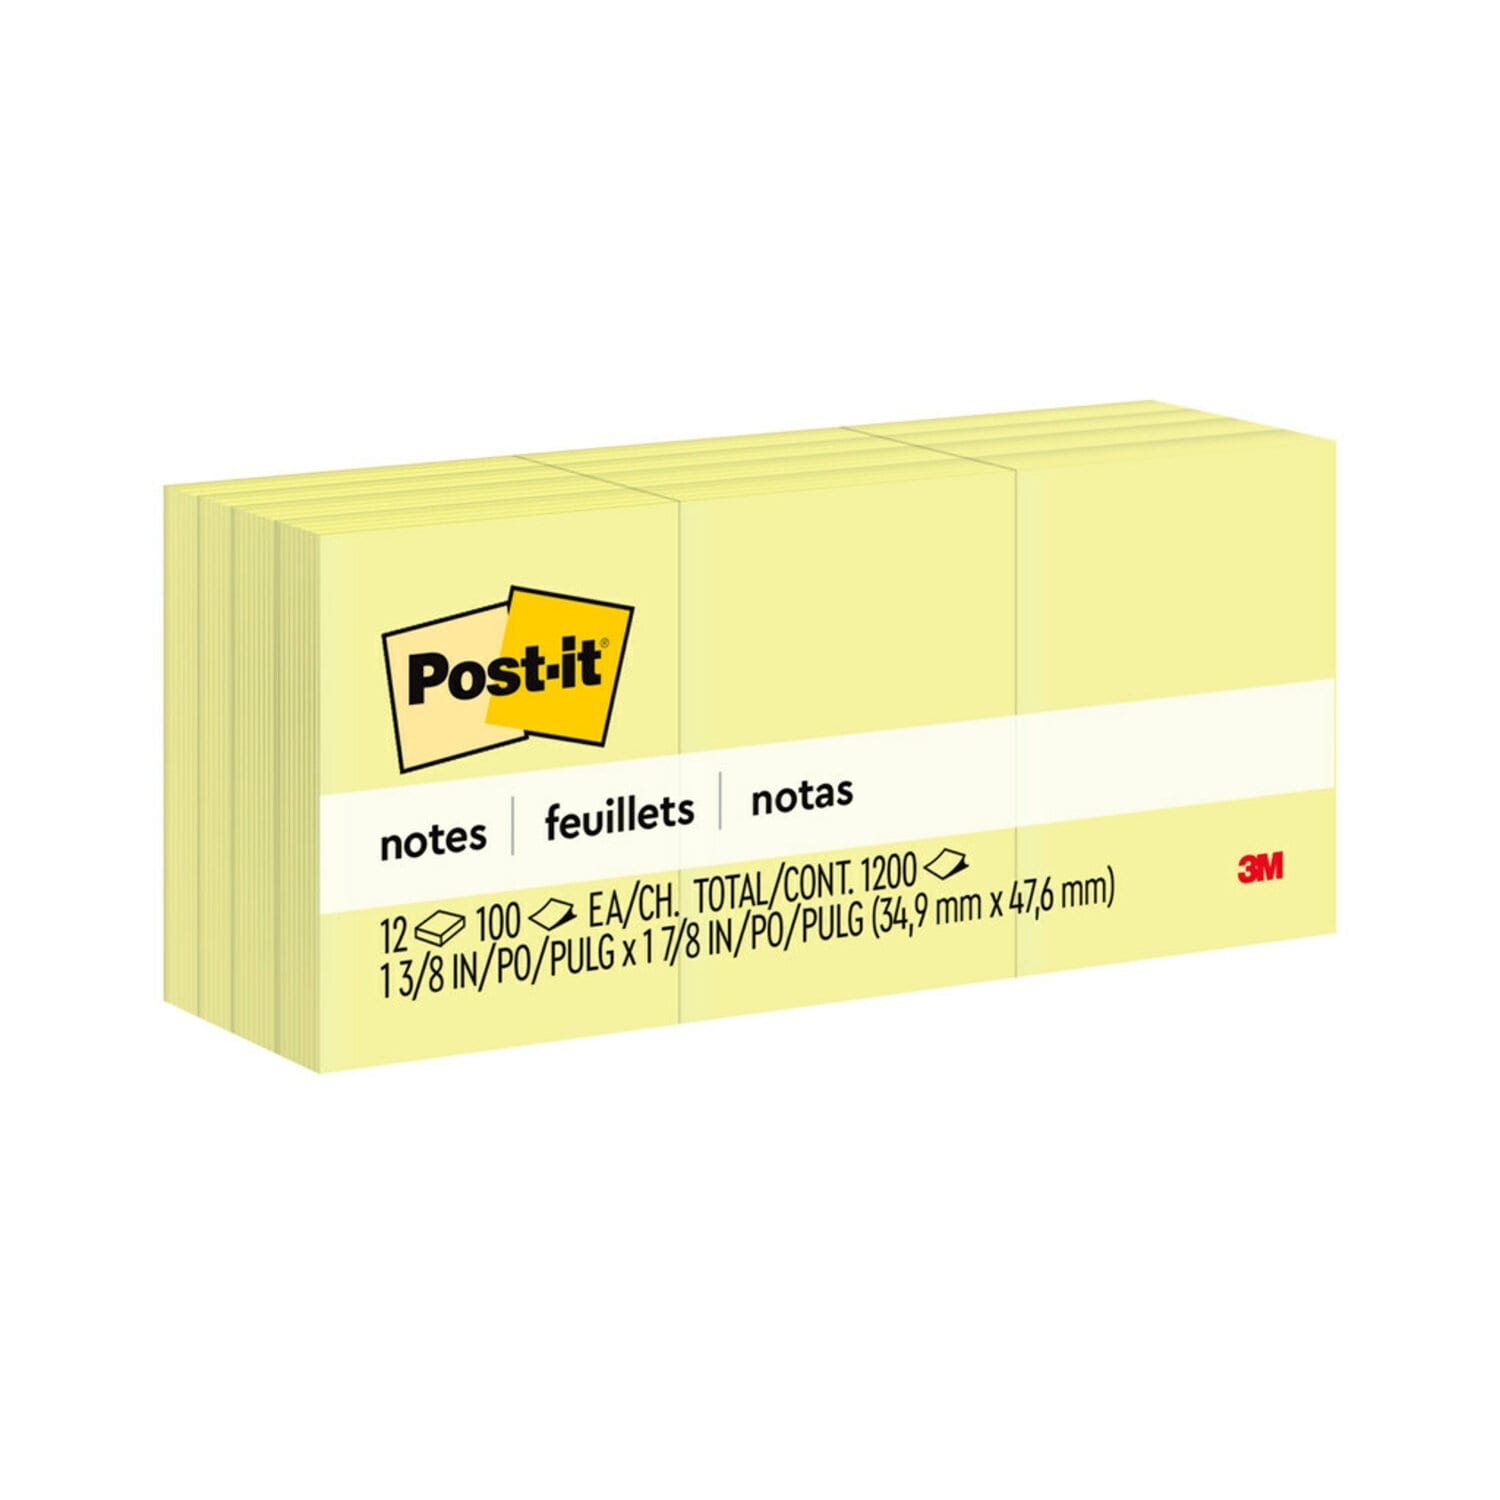 7100229685 - Post-it Products Notes 653, 1 3/8 in x 1 7/8 in (34.9 mm x 47.6 mm)